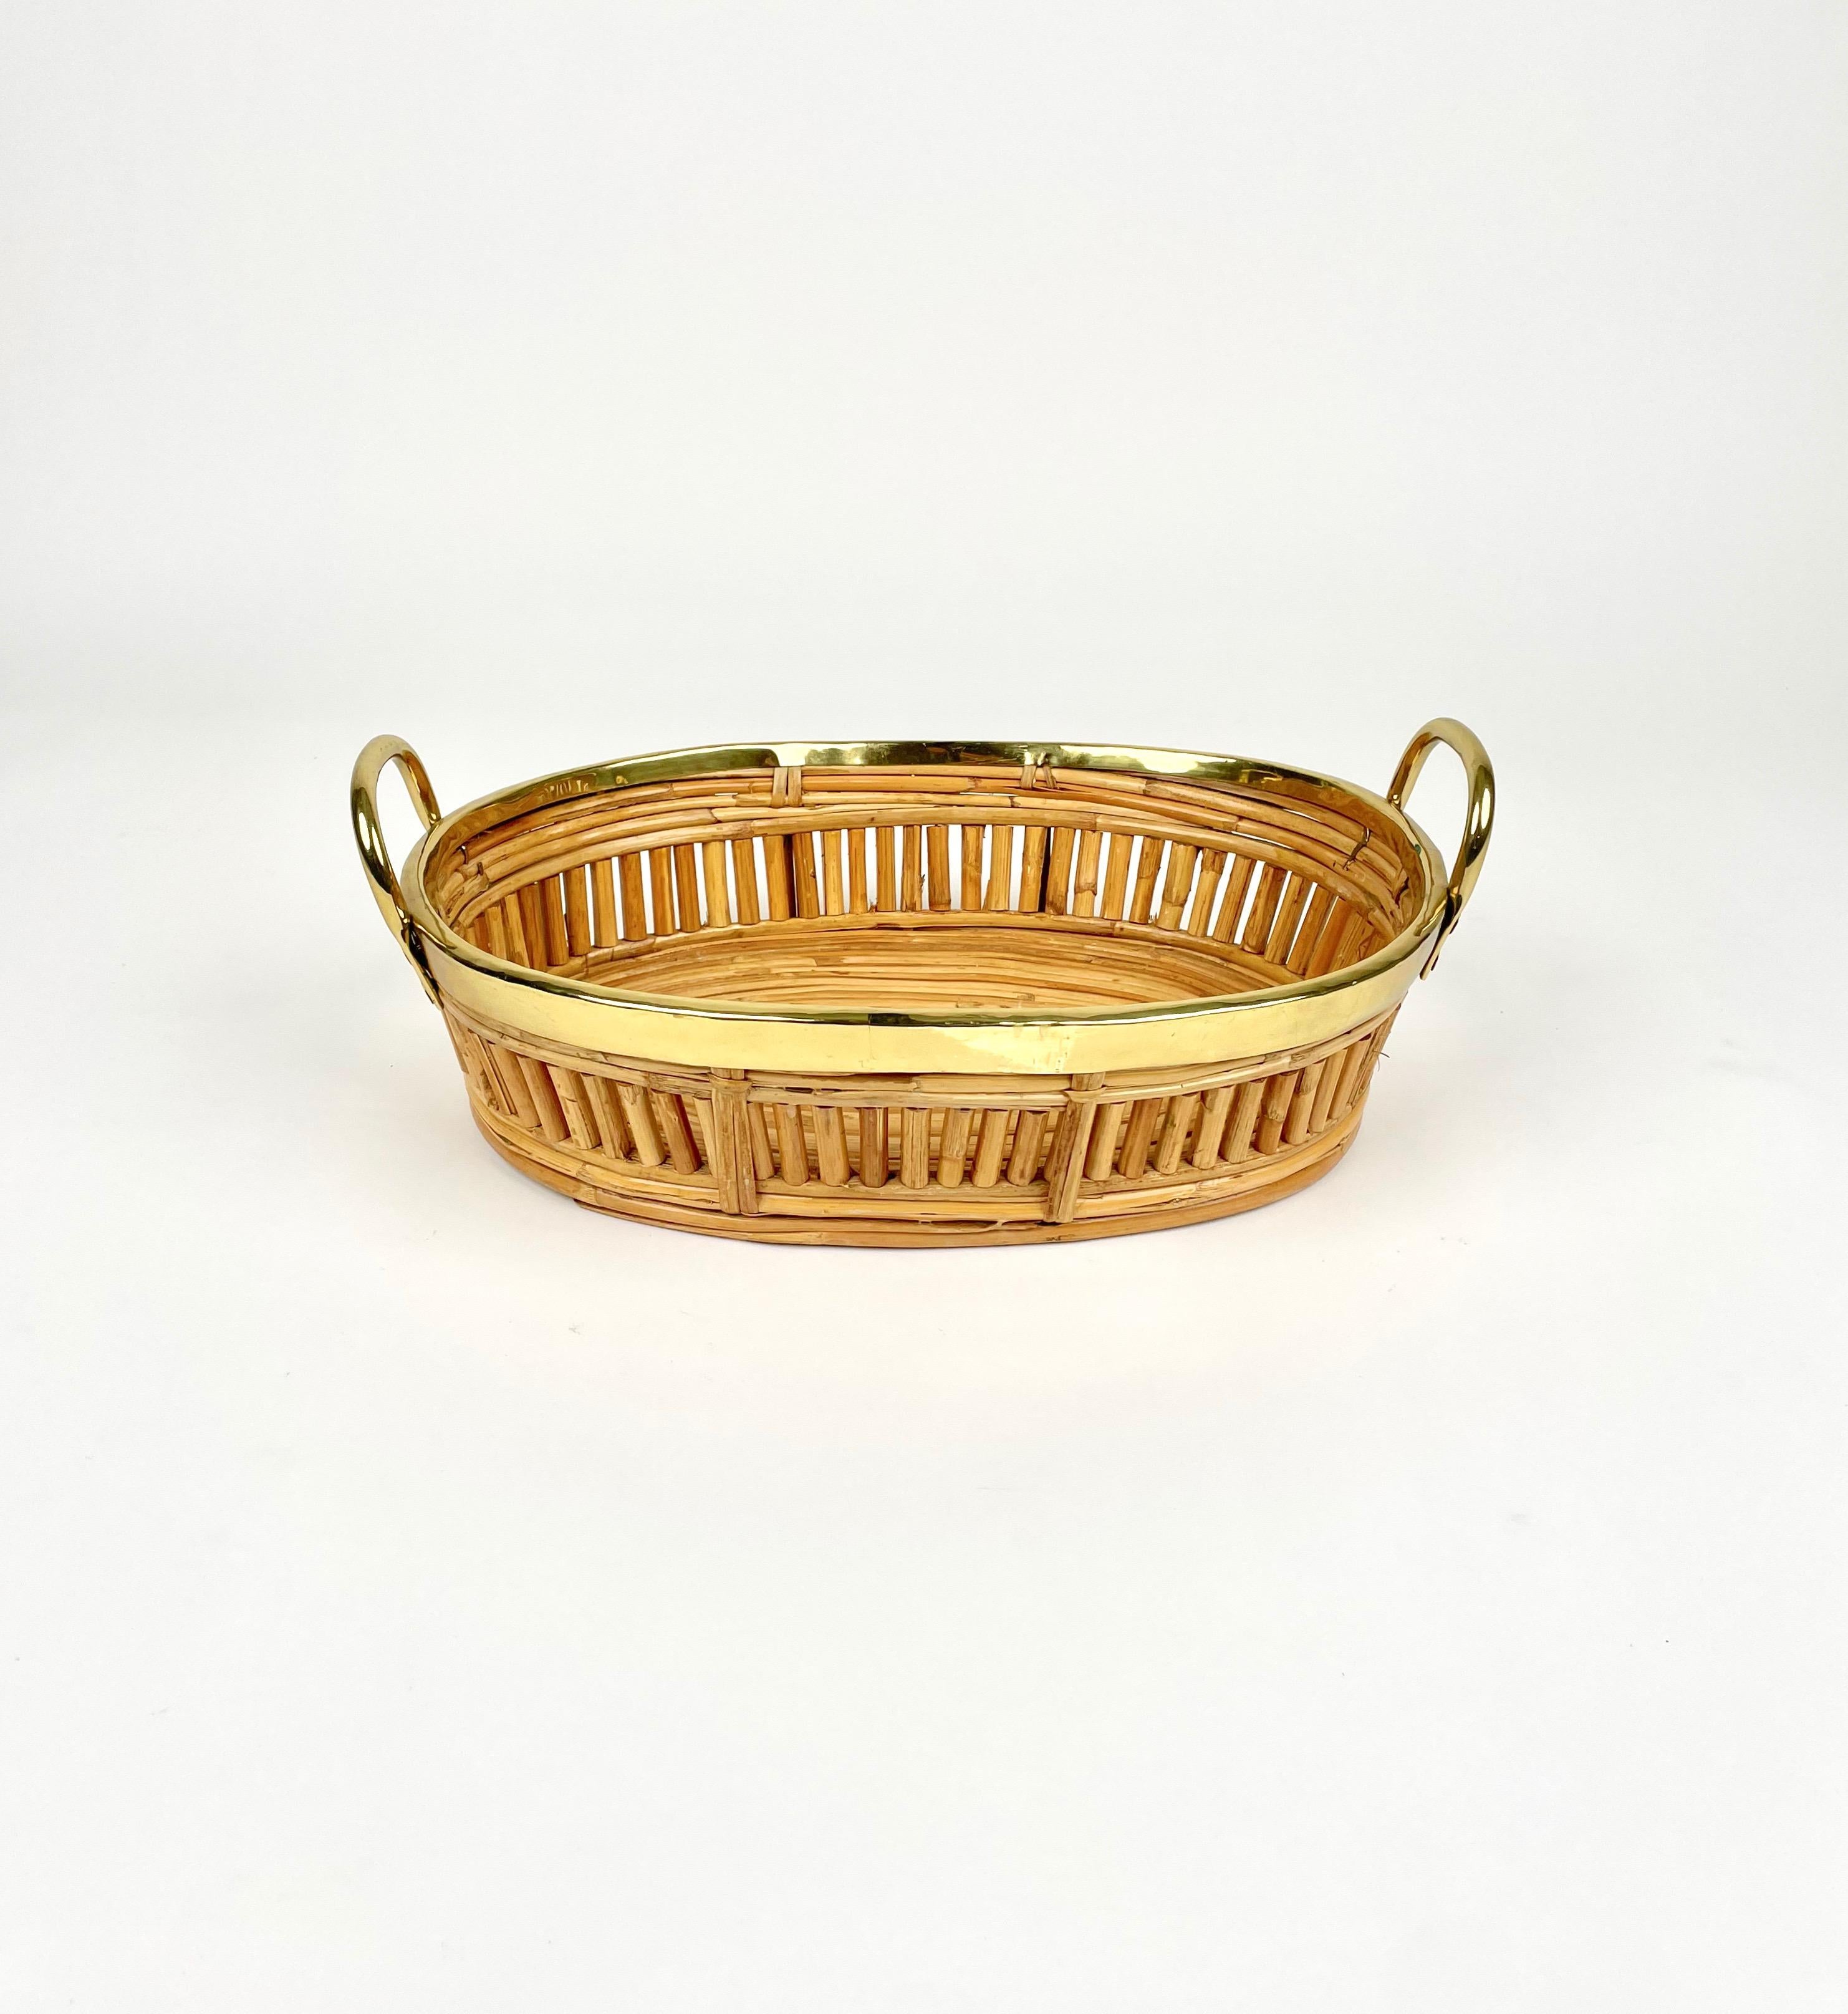 Oval centerpiece basket in rattan with handles featuring brass borders. 

Made in Italy in che 1970s.